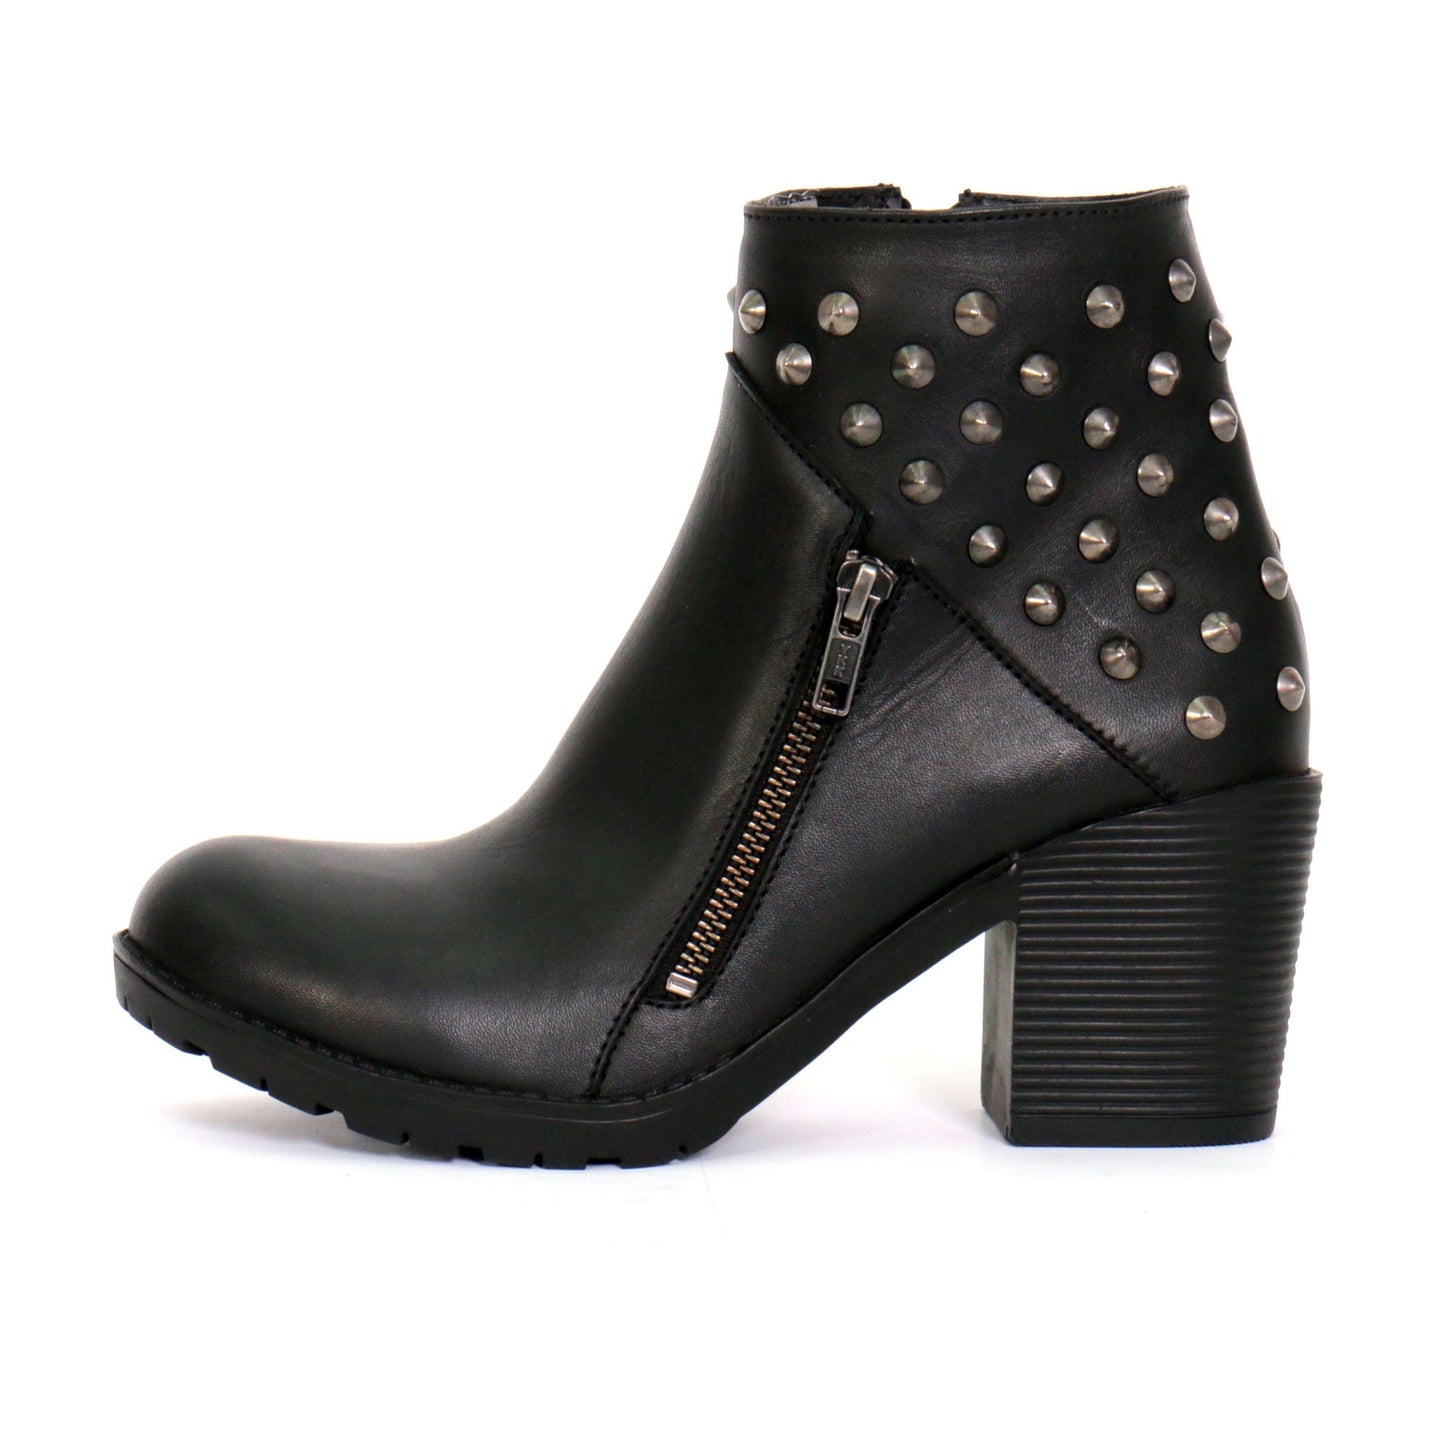 Hot Leathers BTL1003 Ladies 5-inch Black Studded Ankle Leather Boots with Side Zippers